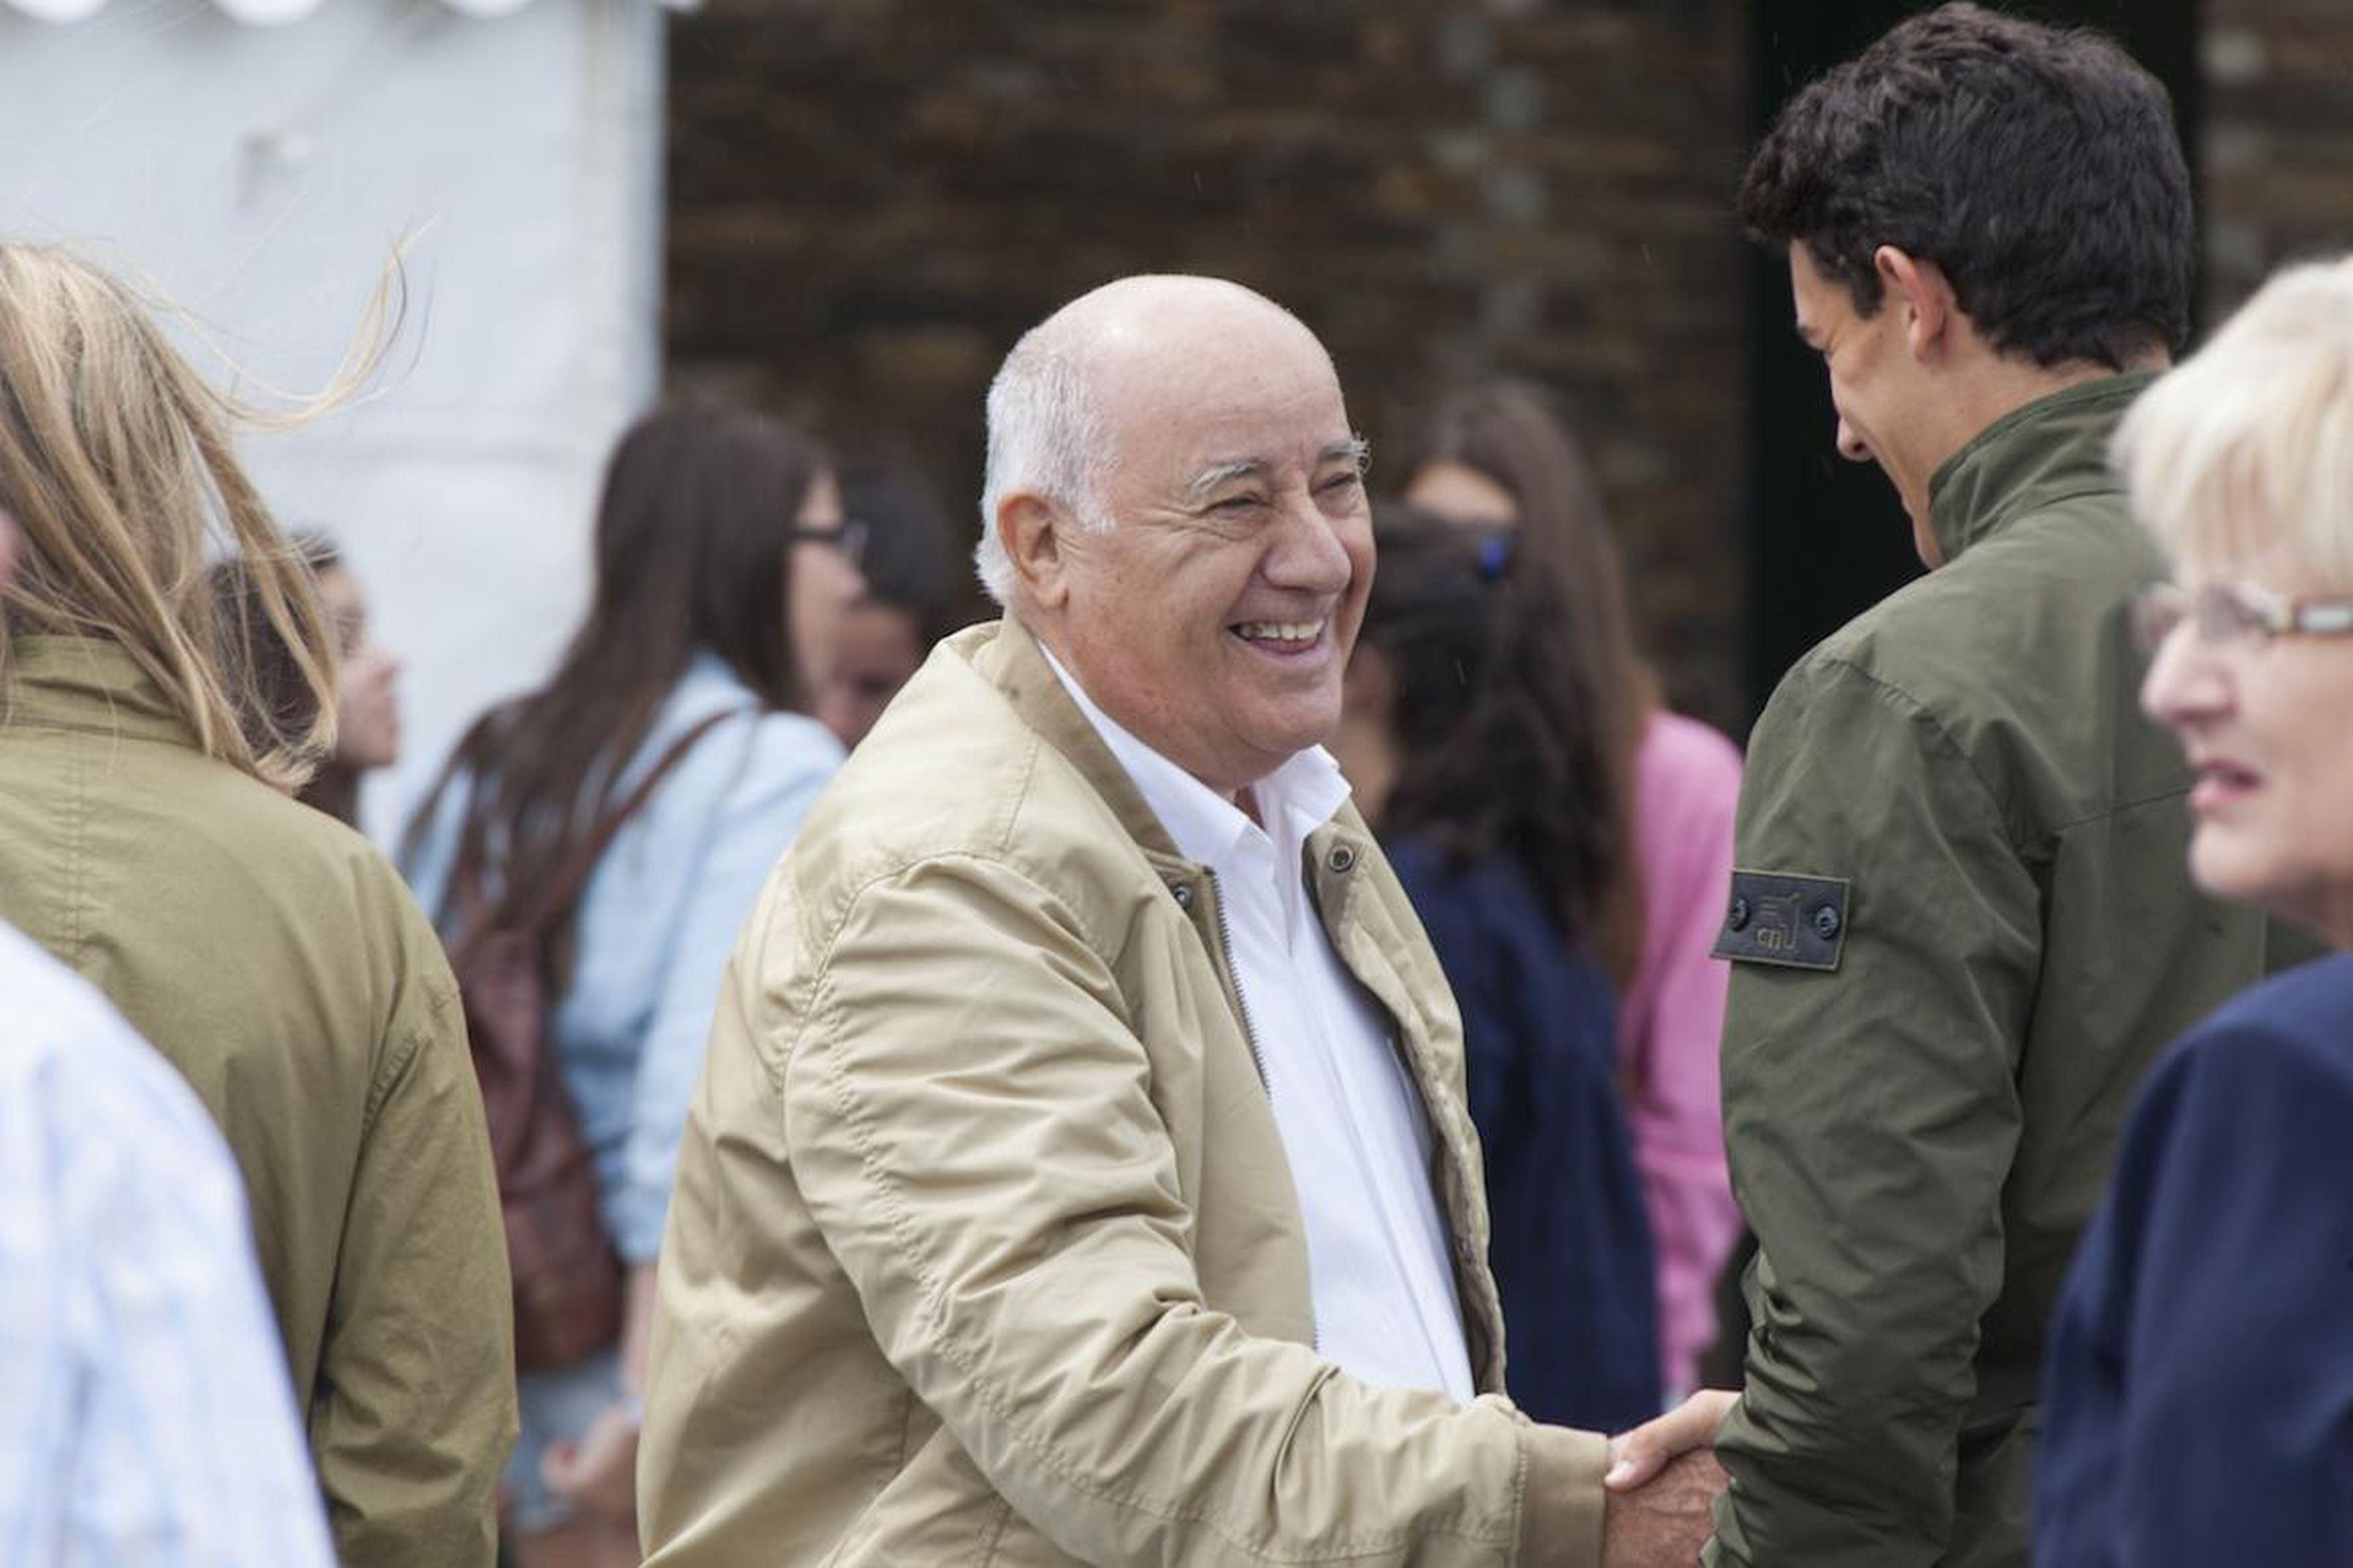 Amancio Ortega is the sixth-richest person in the world, with an estimated net worth of $68.5 billion.